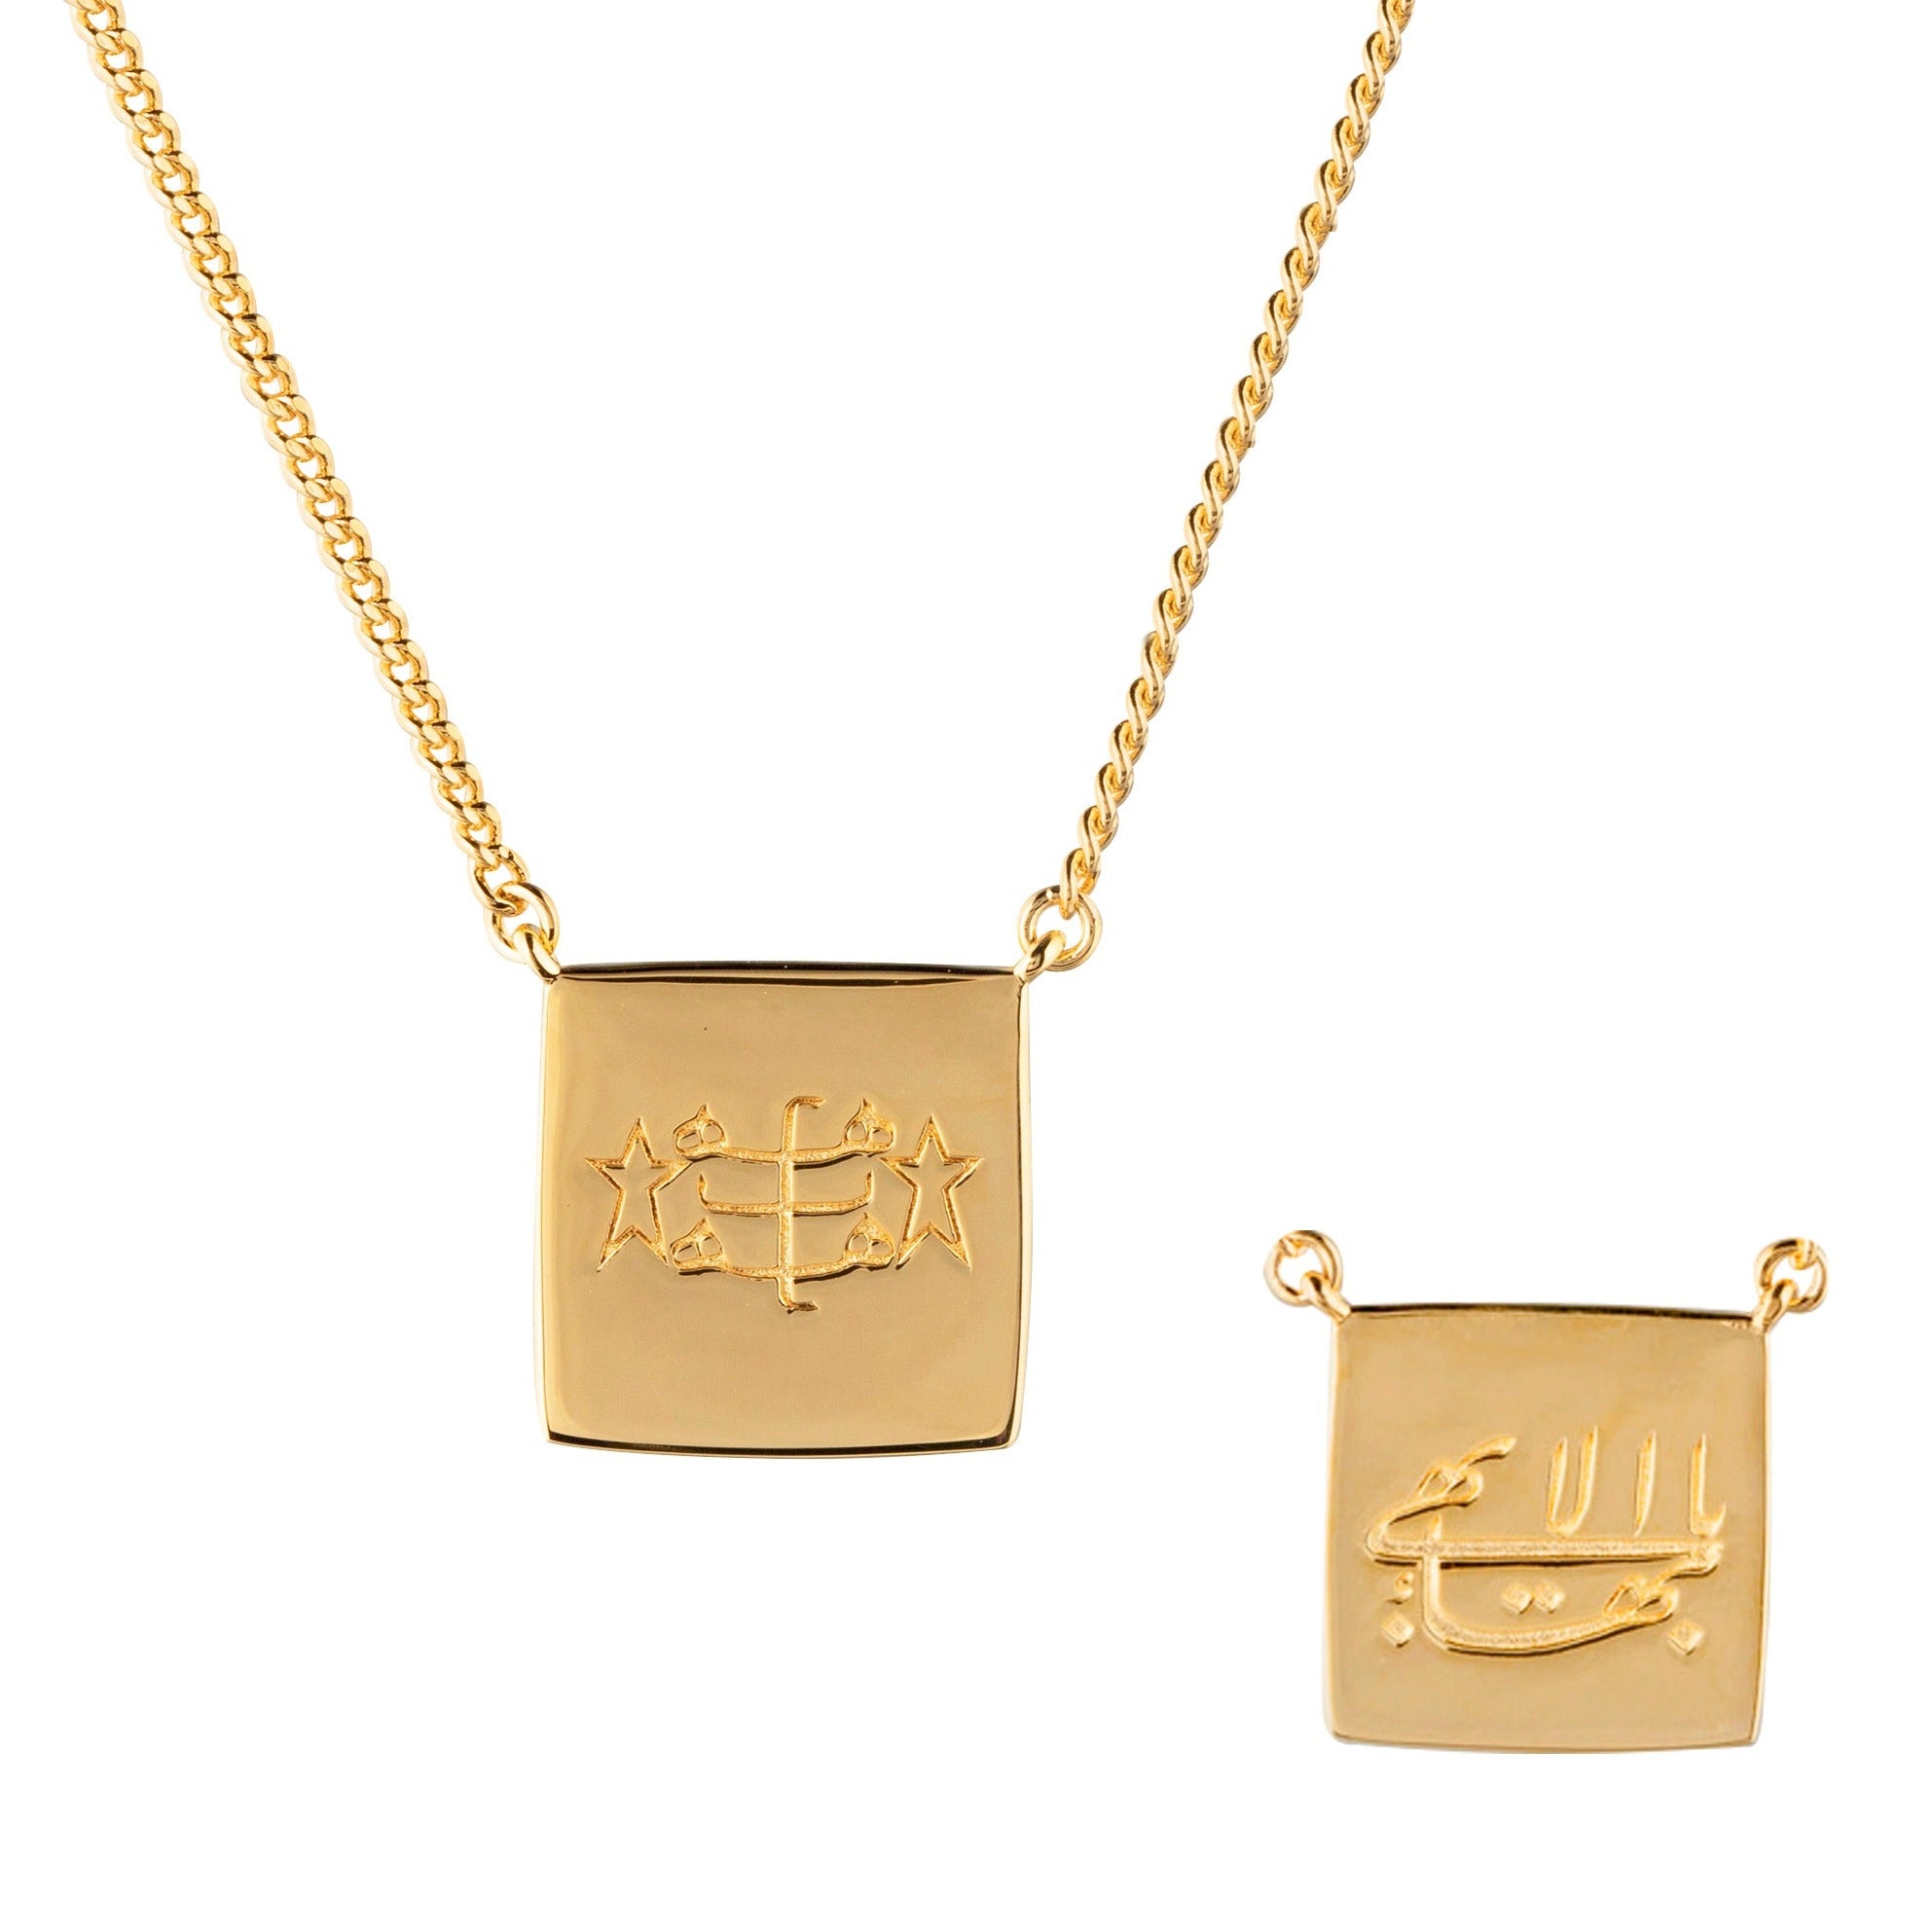 simple gold cushion Baha'i necklace with an engraving of the Greatest Name in Arabic and ringstone symbol double sided